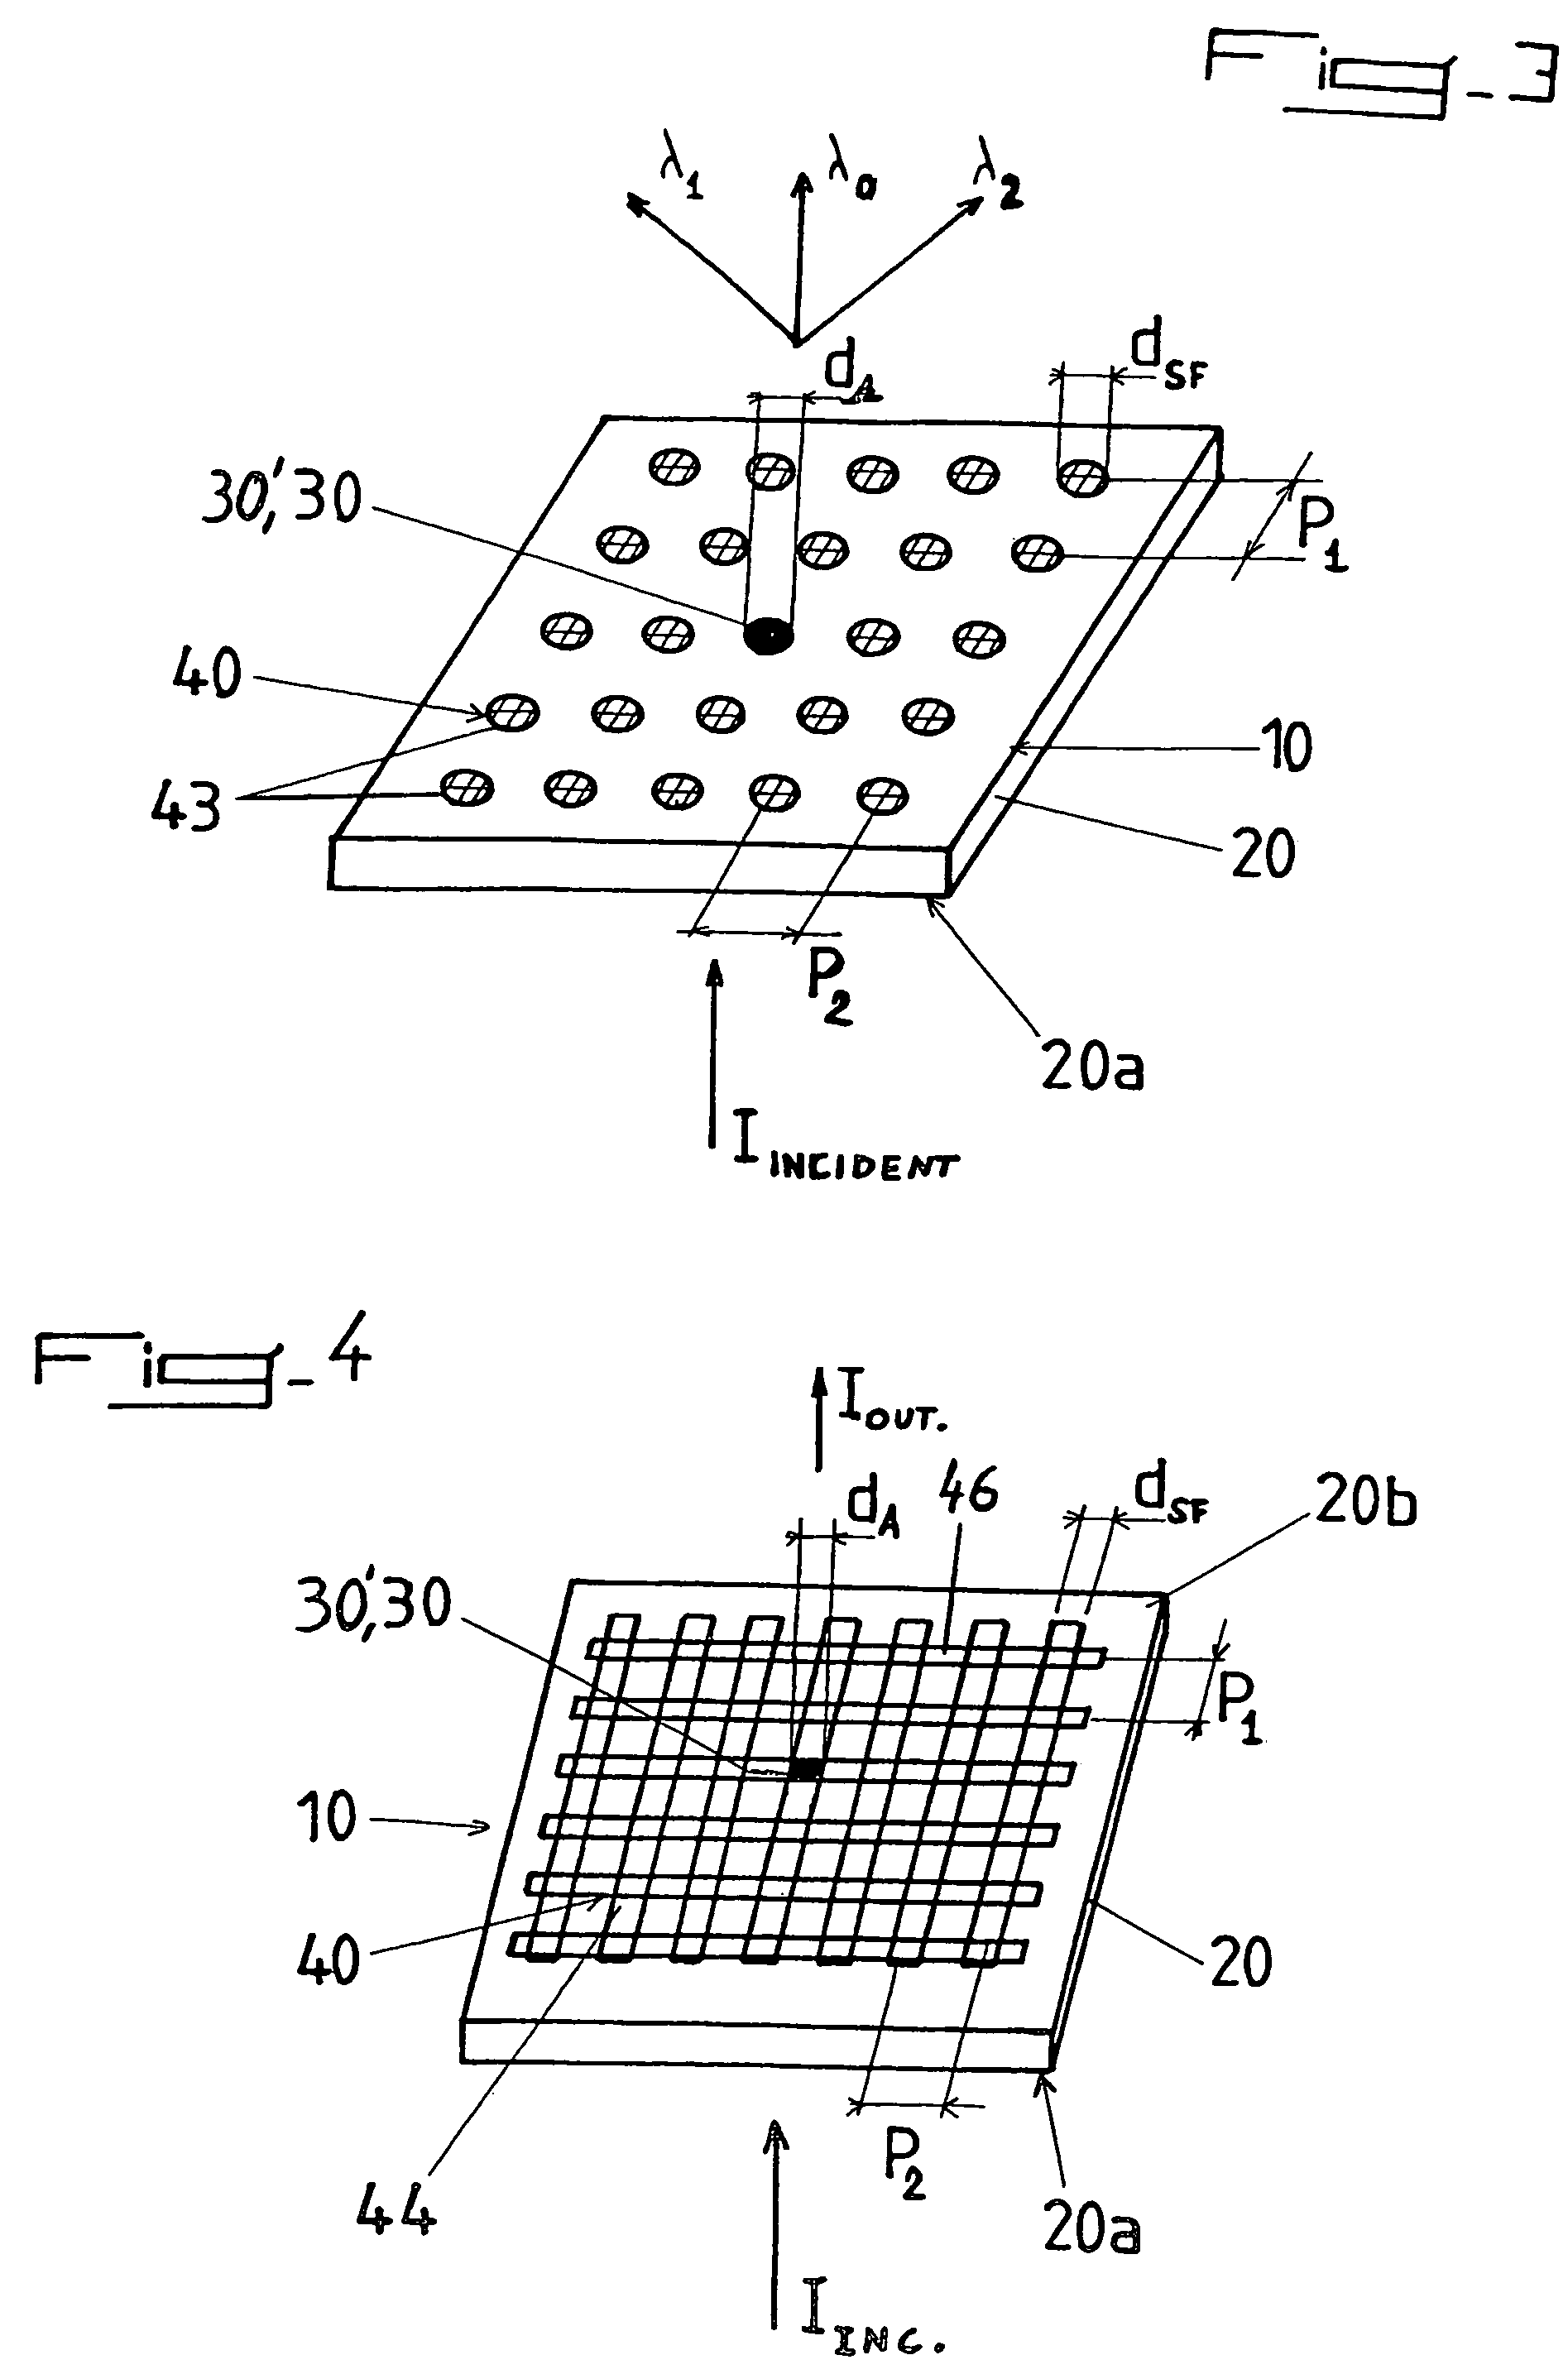 Optical transmission apparatus with directionality and divergence control